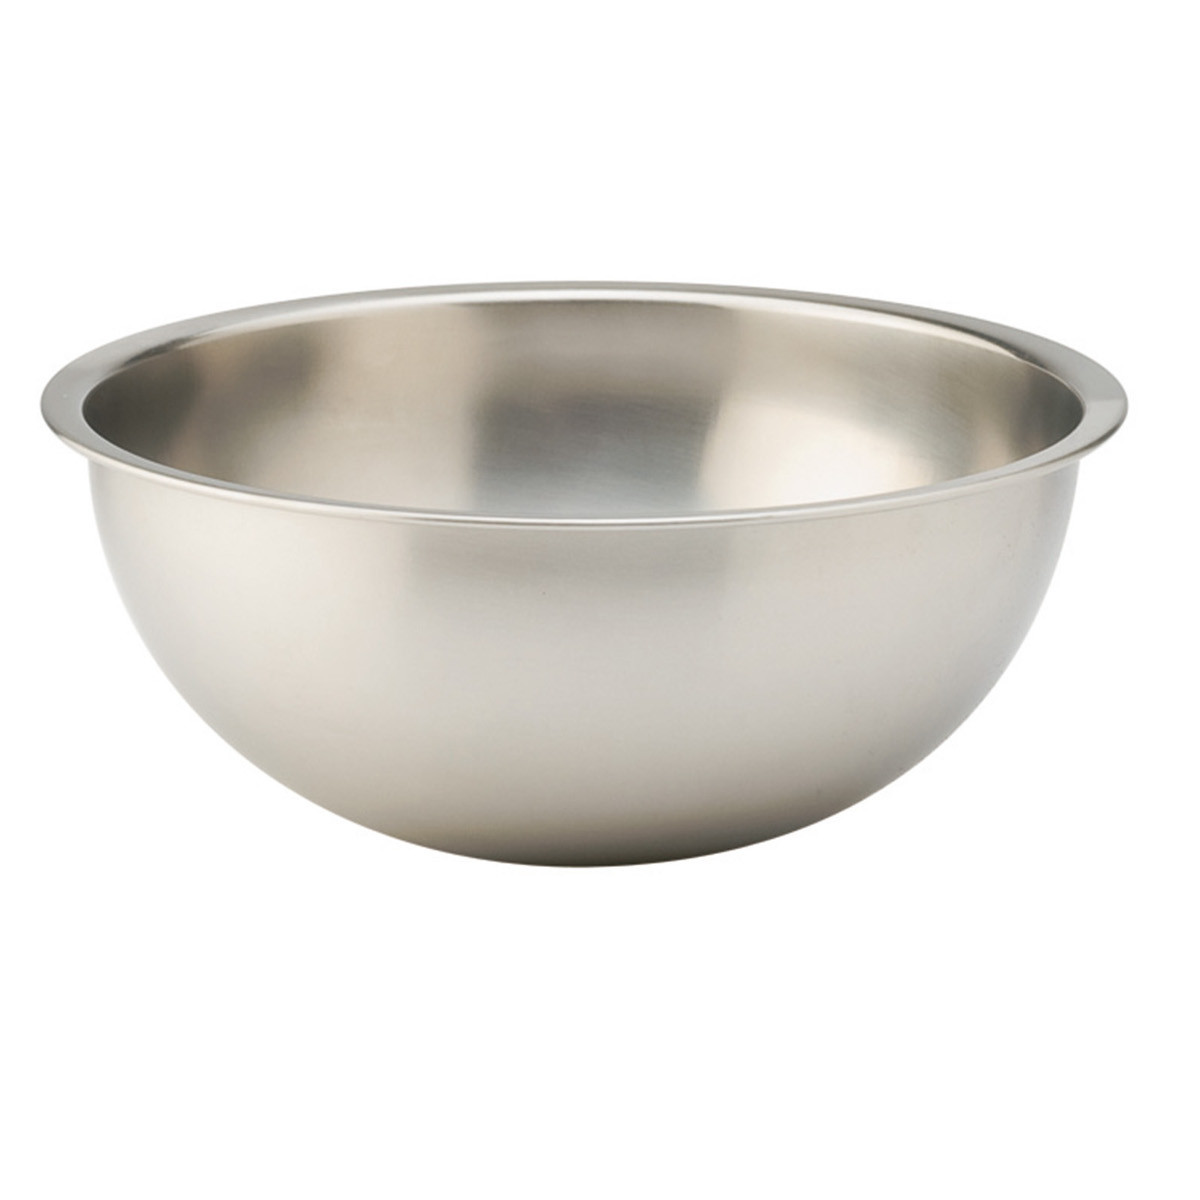 16-Quart Heavy Duty Stainless Steel Mixing Bowl